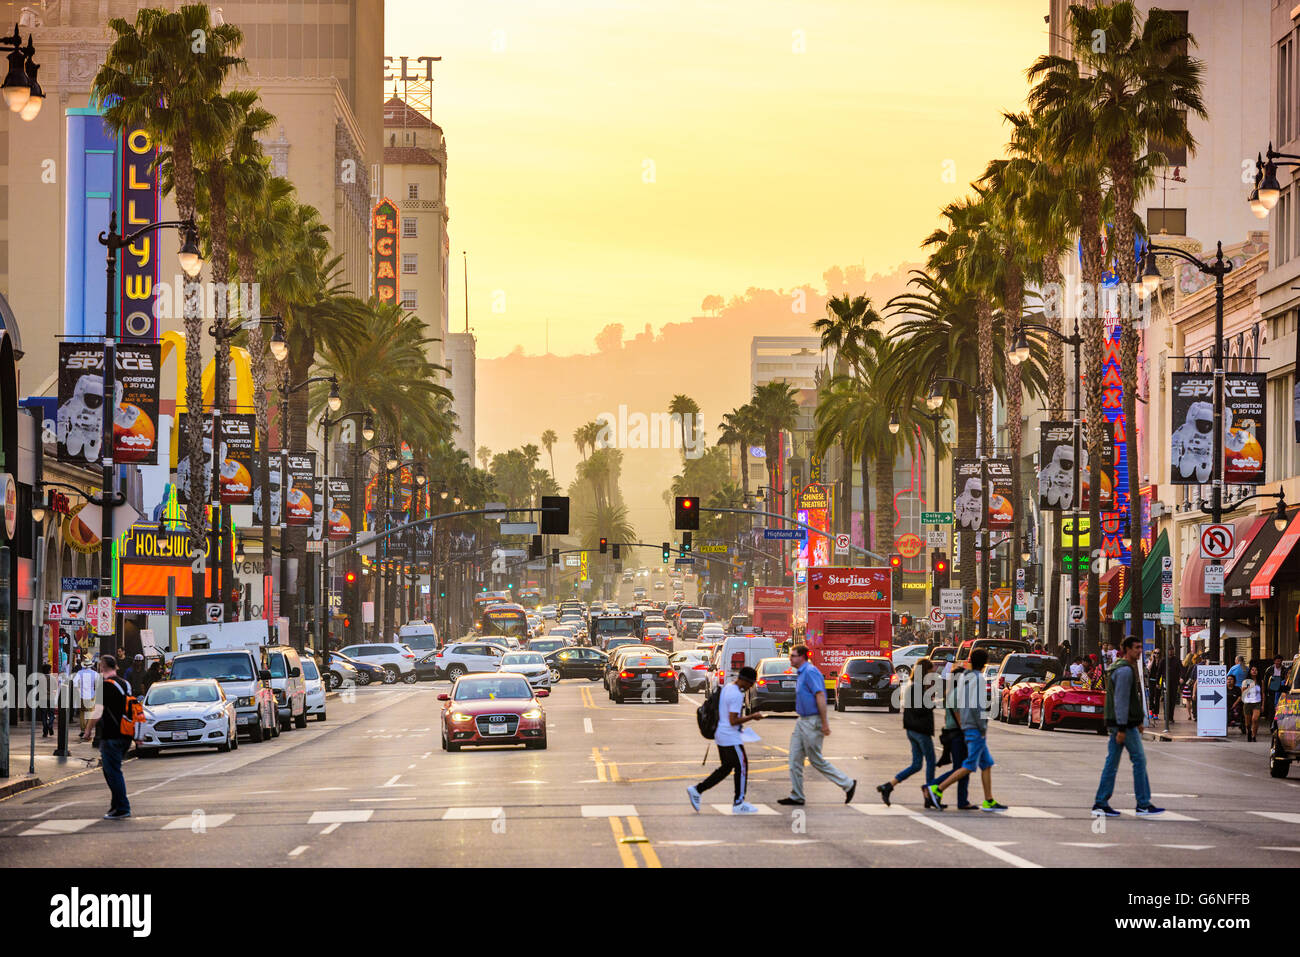 Traffic and pedestrians on Hollywood Boulevard at dusk in Los Angeles, California, USA. Stock Photo